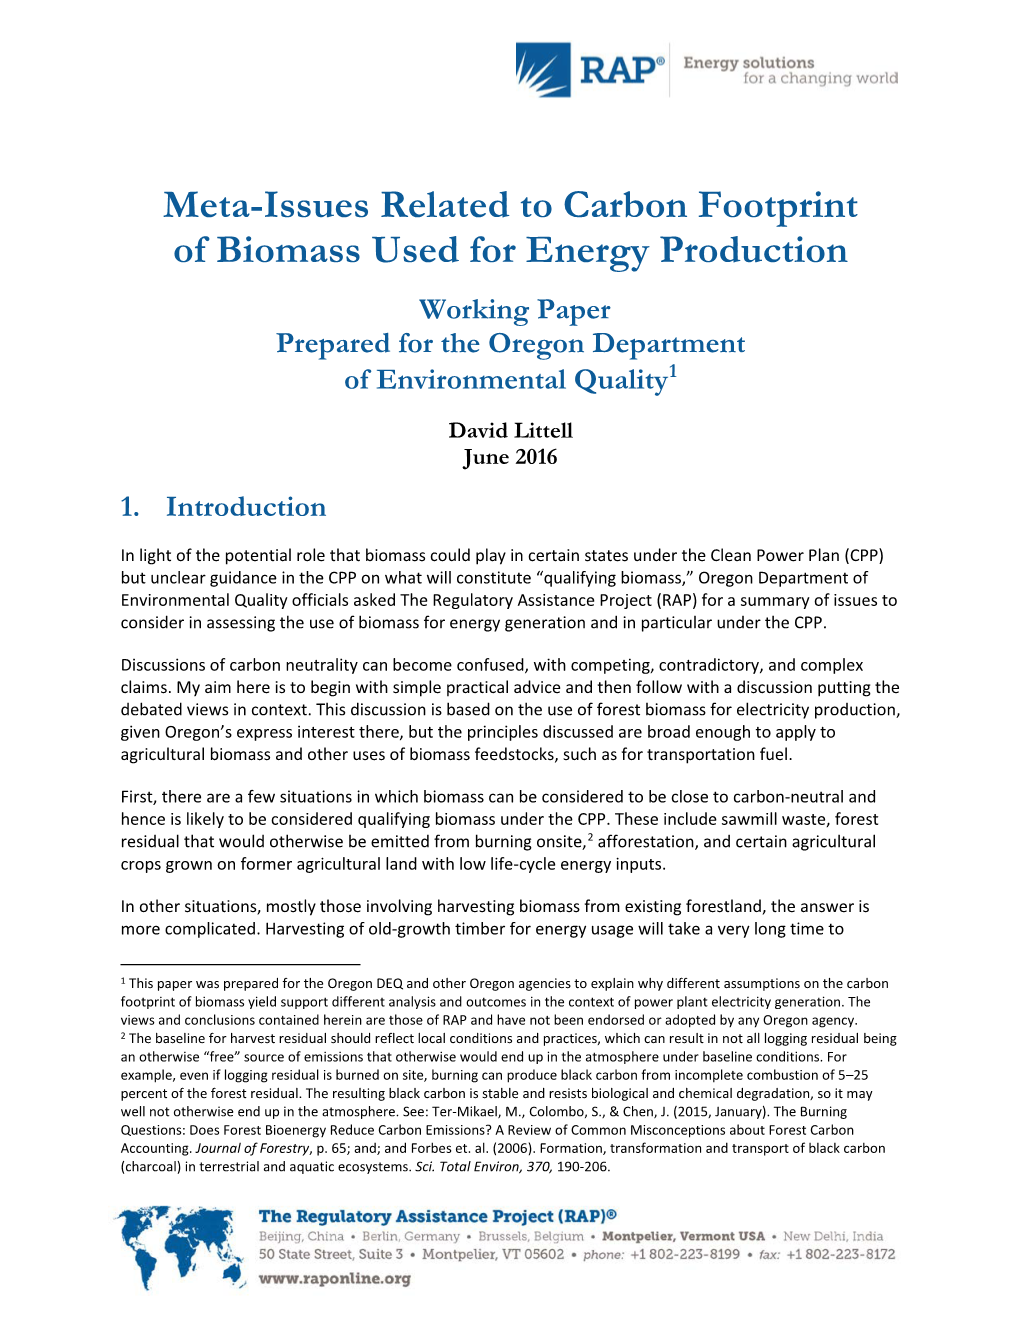 Meta-Issues Related to Carbon Footprint of Biomass Used for Energy Production